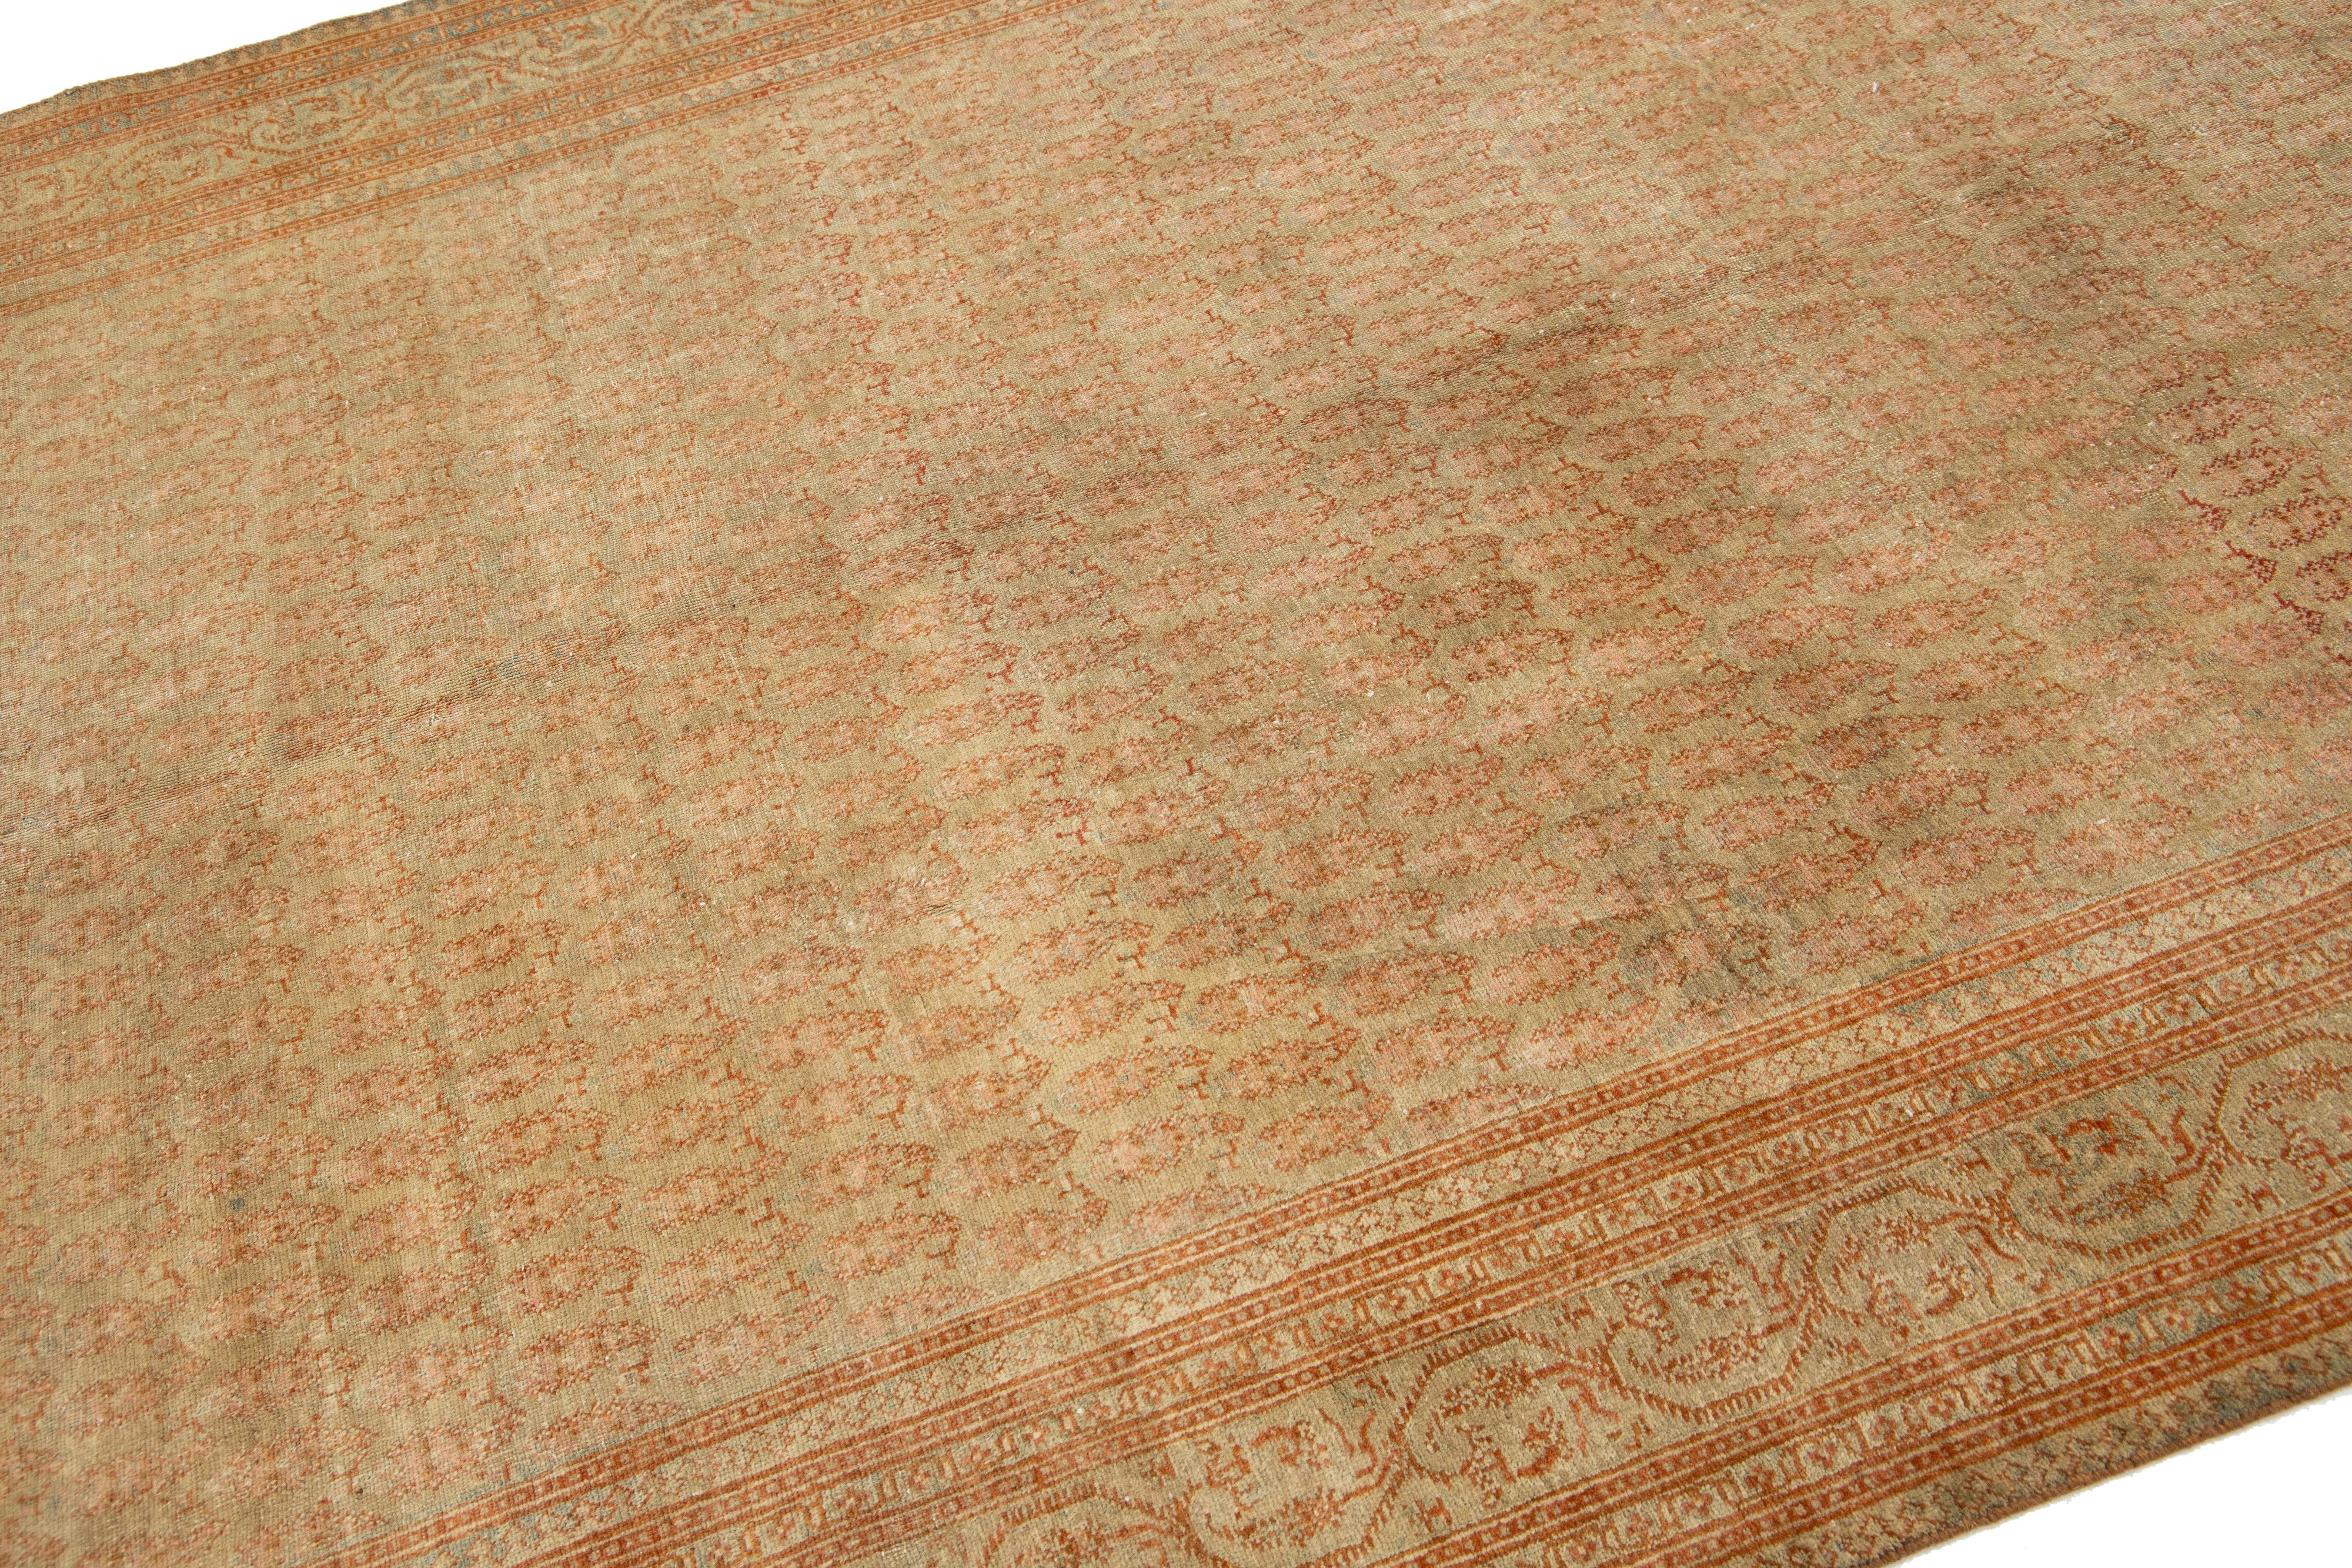 Persian 1920s Antique Sivas Gallery Wool rug In Beige Tan Color With Allover Pattern For Sale